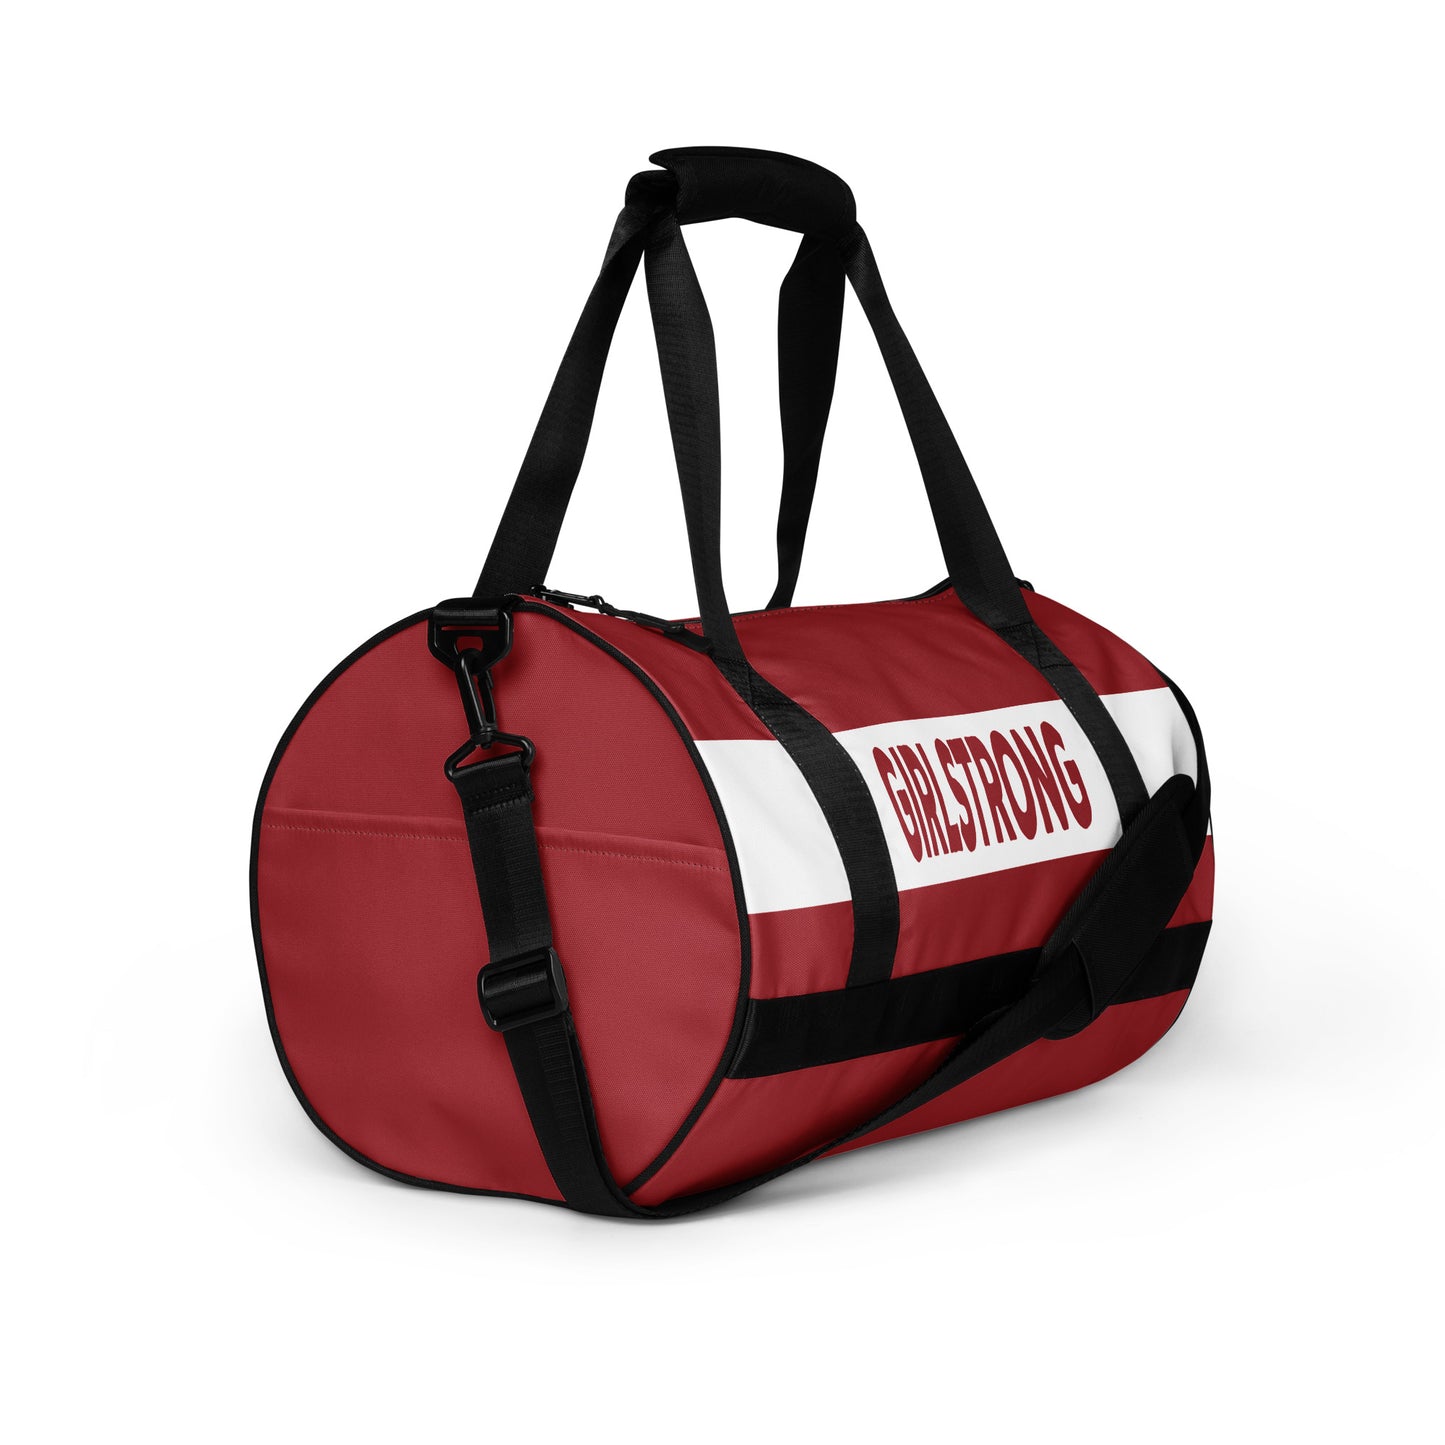 THE BETTY BAG, LIFEGUARD RED